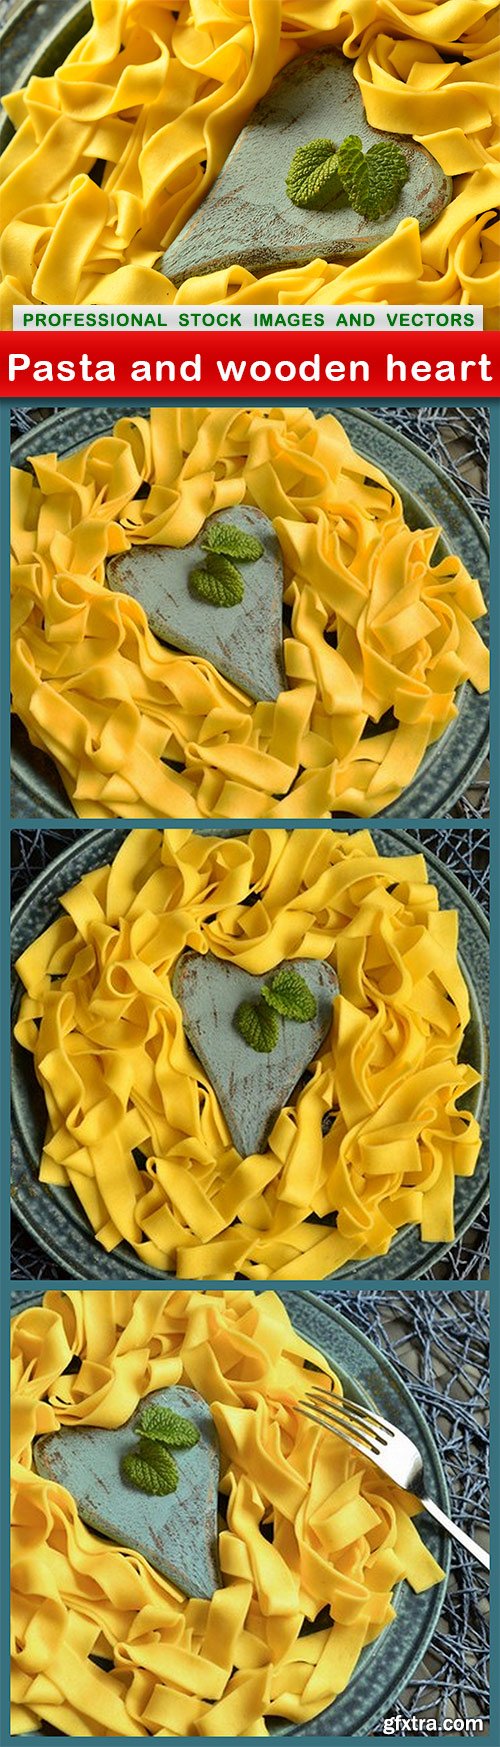 Pasta and wooden heart - 4 UHQ JPEG